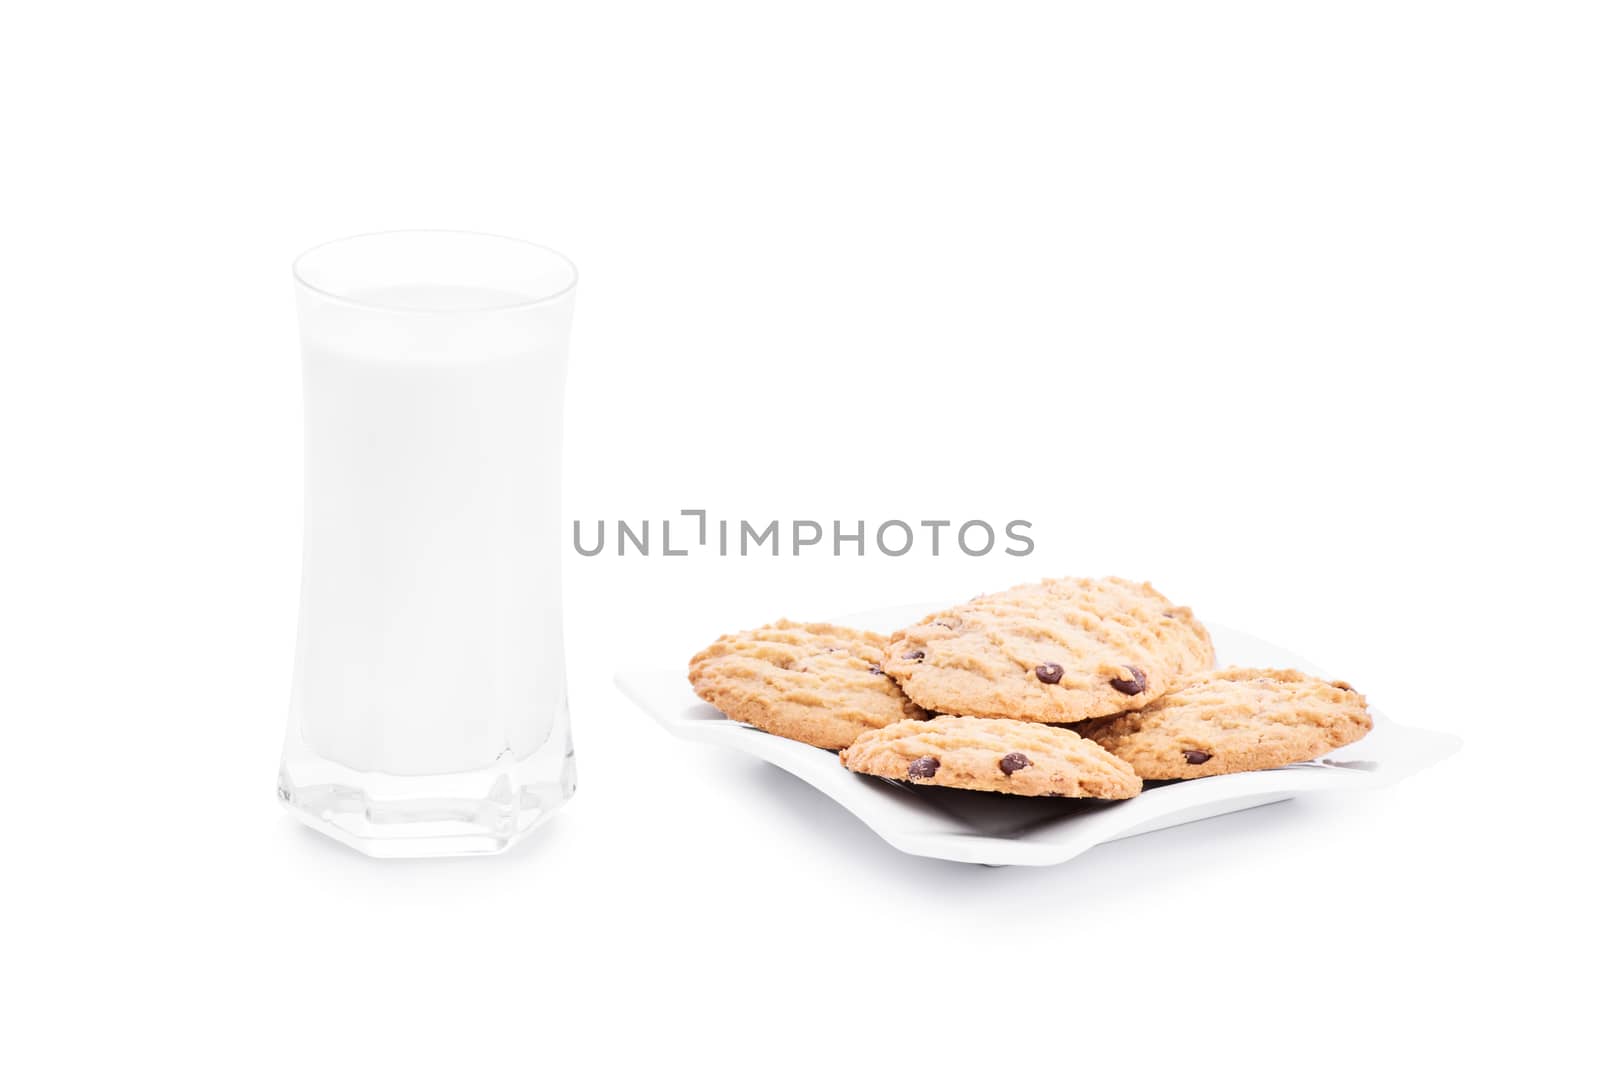 Close up shot of chocolate chip cookies on a platter with a glass of milk, isolated on white background.